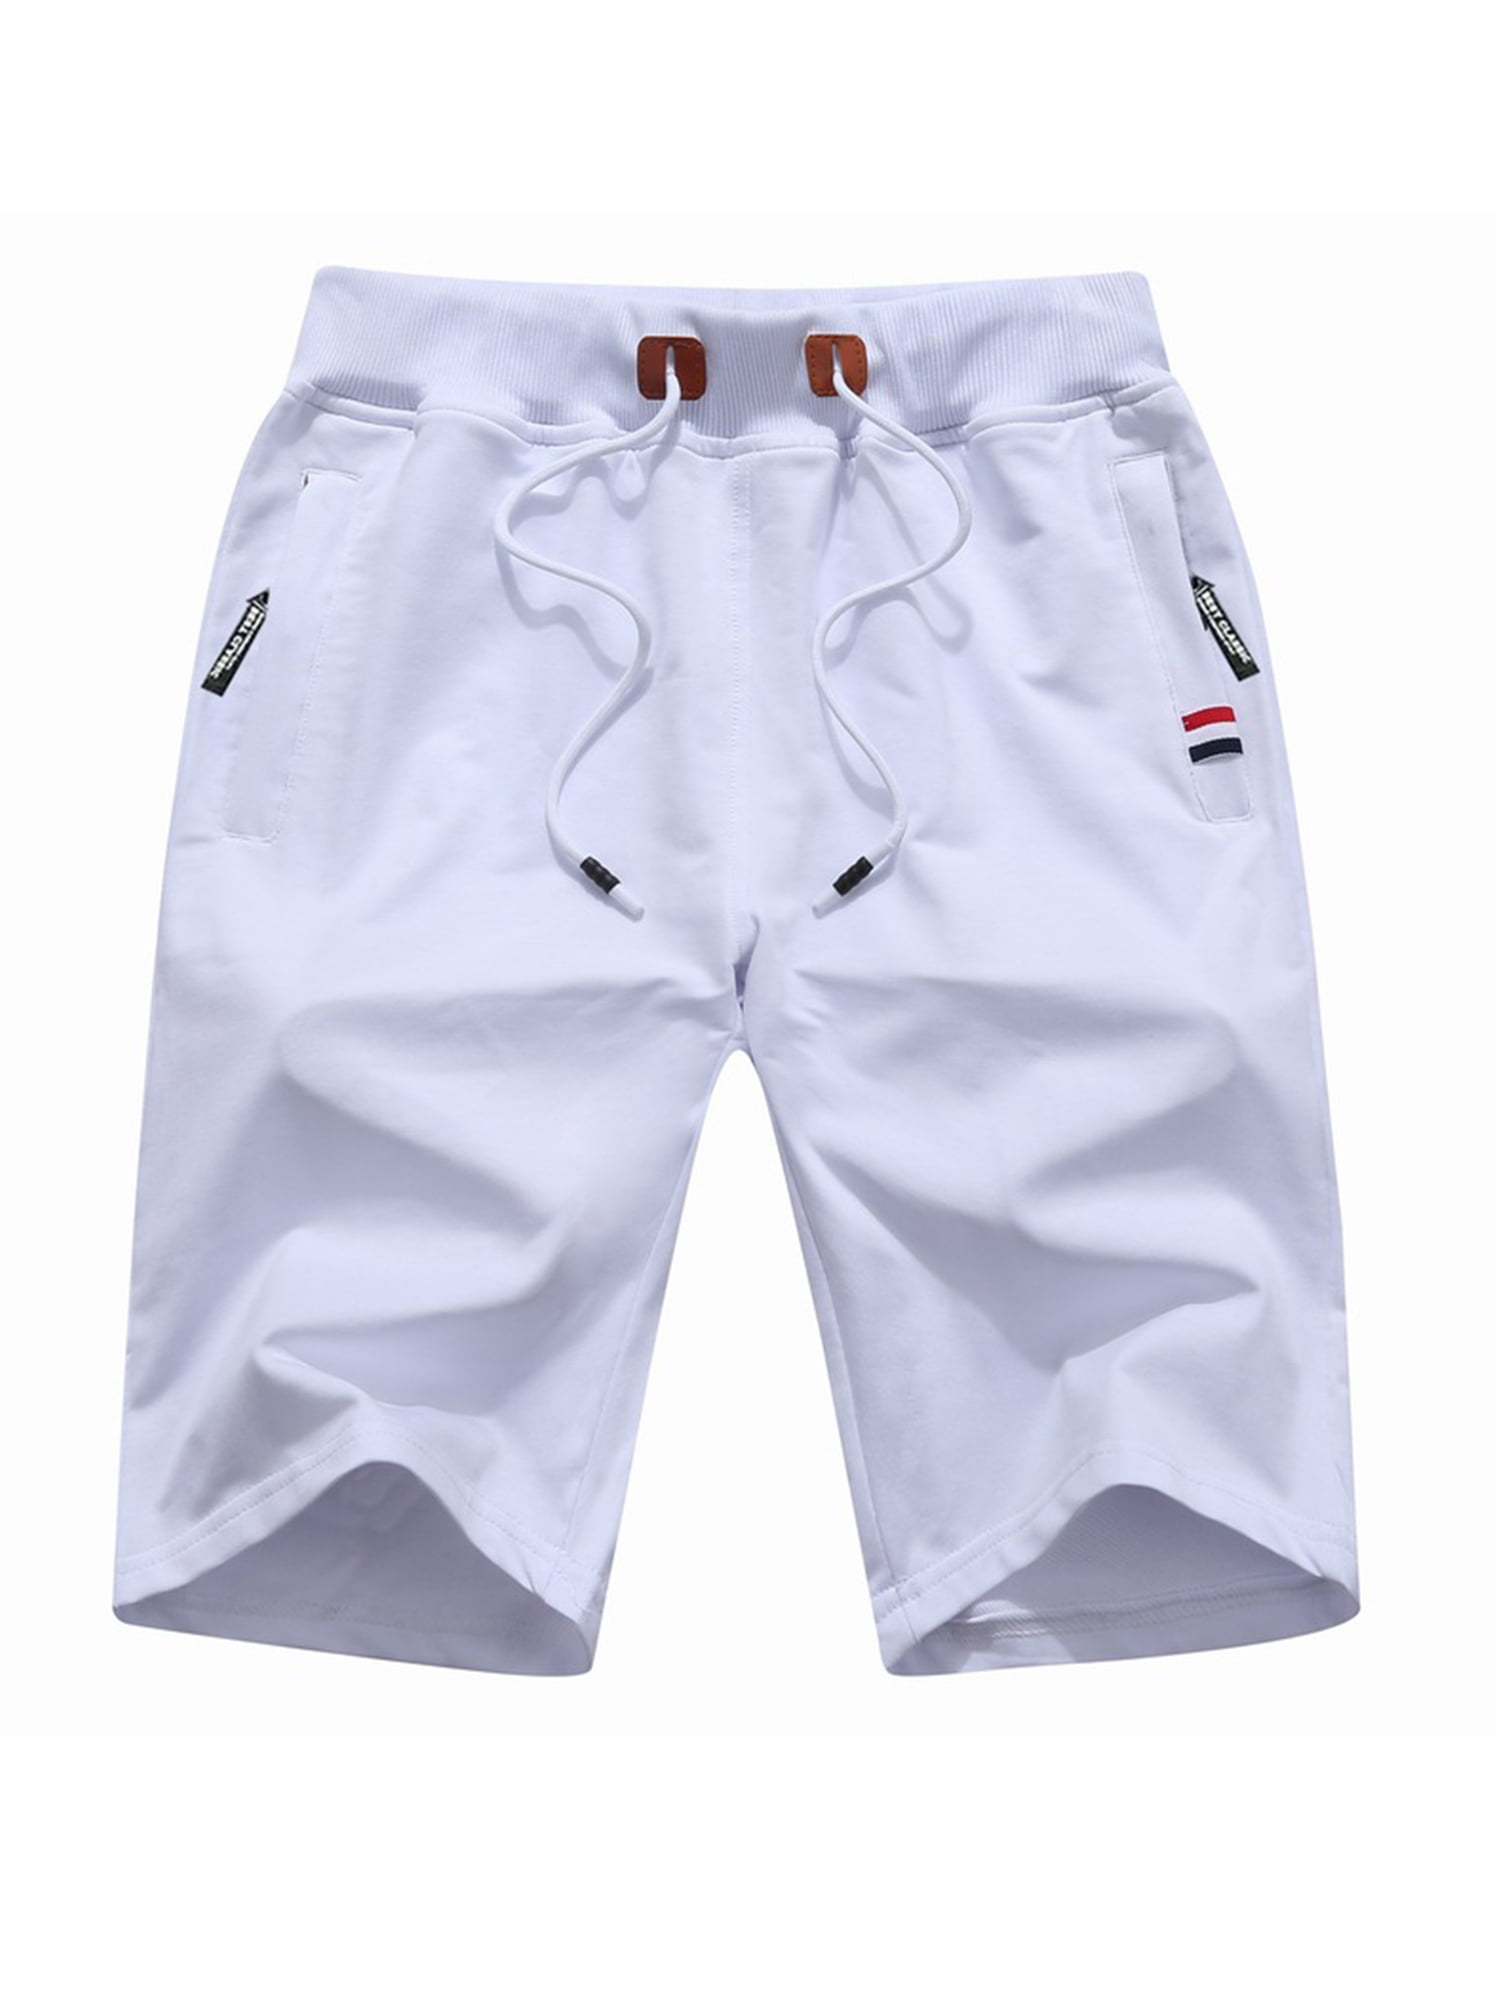 Mens Casual Classic Fit Short Summer Beach Shorts WE Build WE Fight 